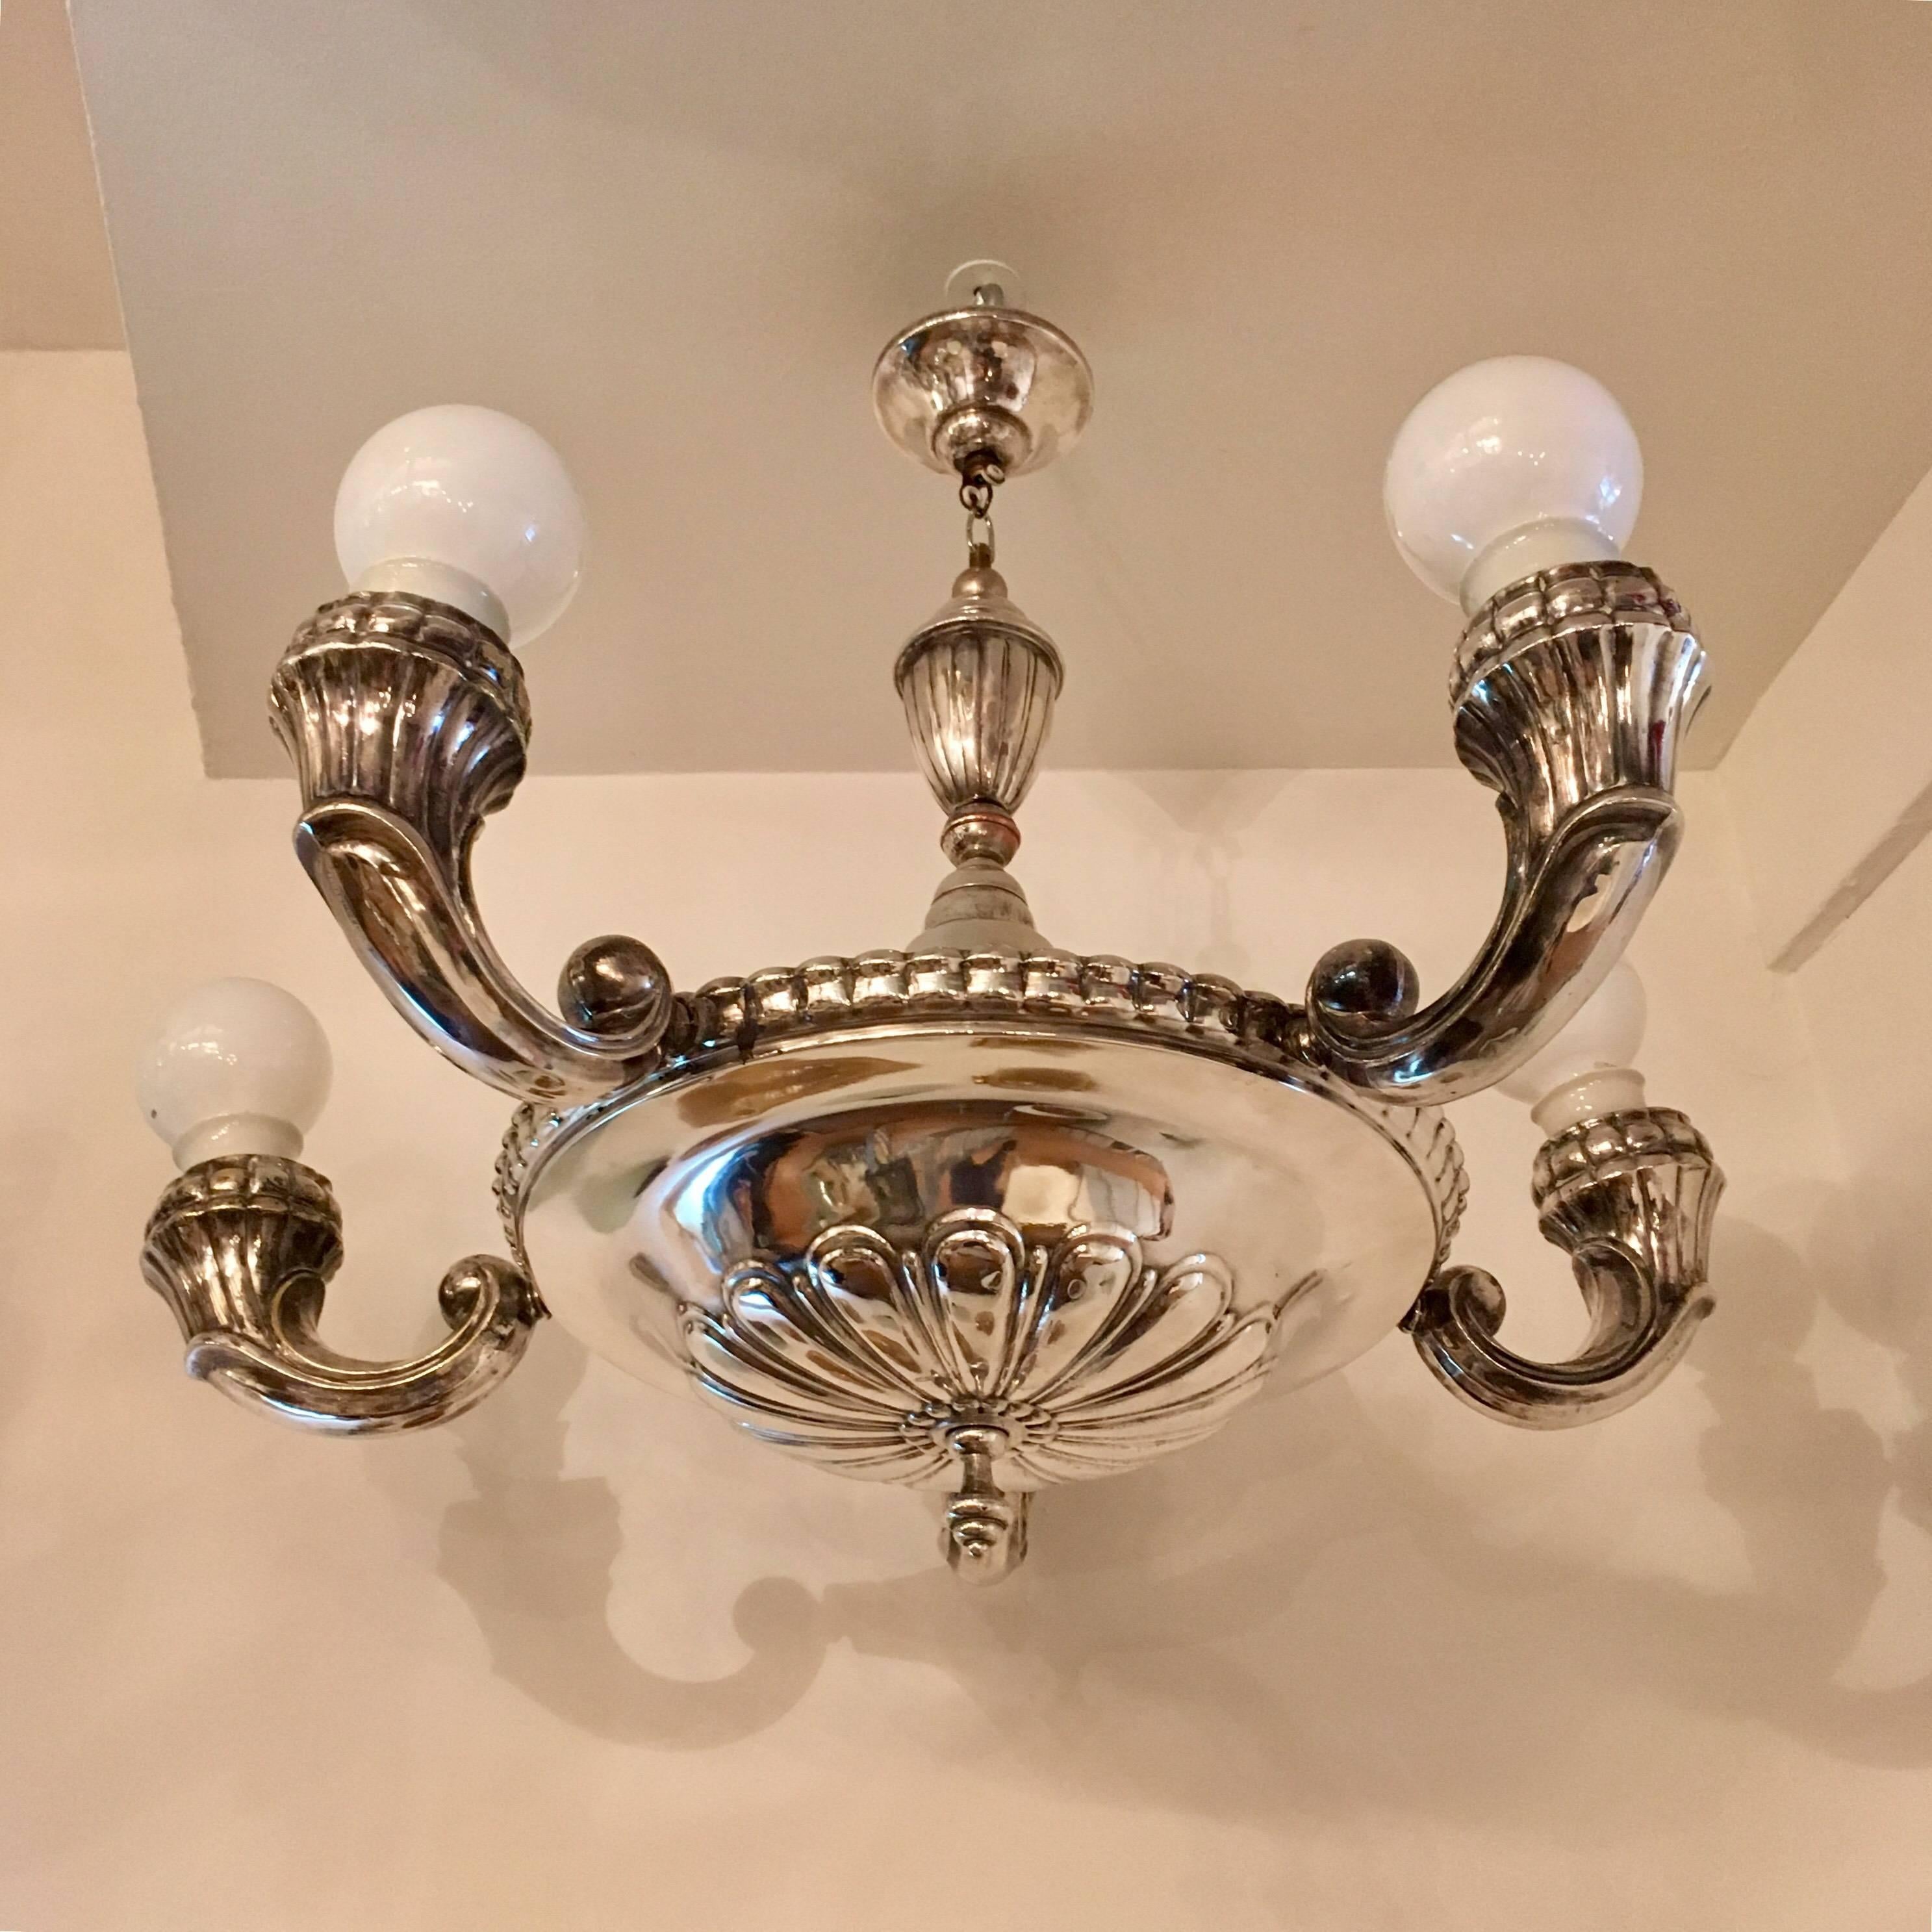 A 1920s silver plated five-arm chandelier made by the Swedish maker, CG Hallberg. Newly rewired.